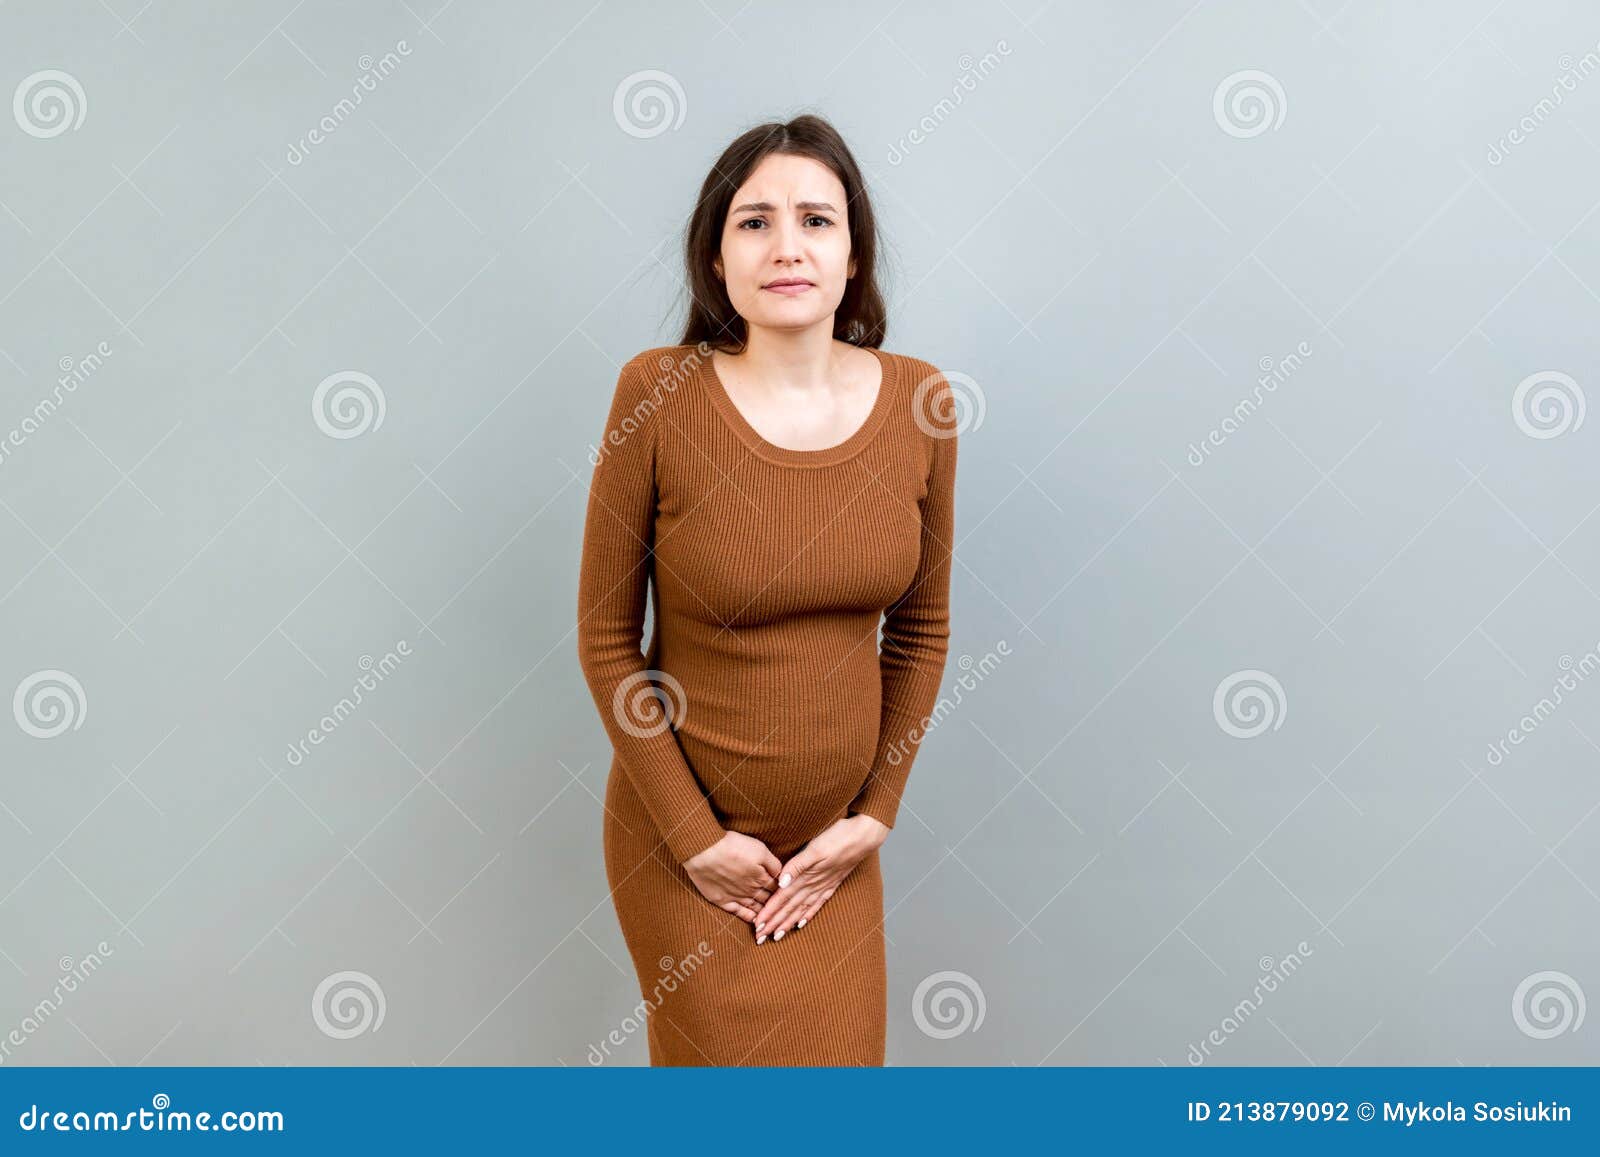 Frequent Urination Pregnant Women Stock Photo 641285530